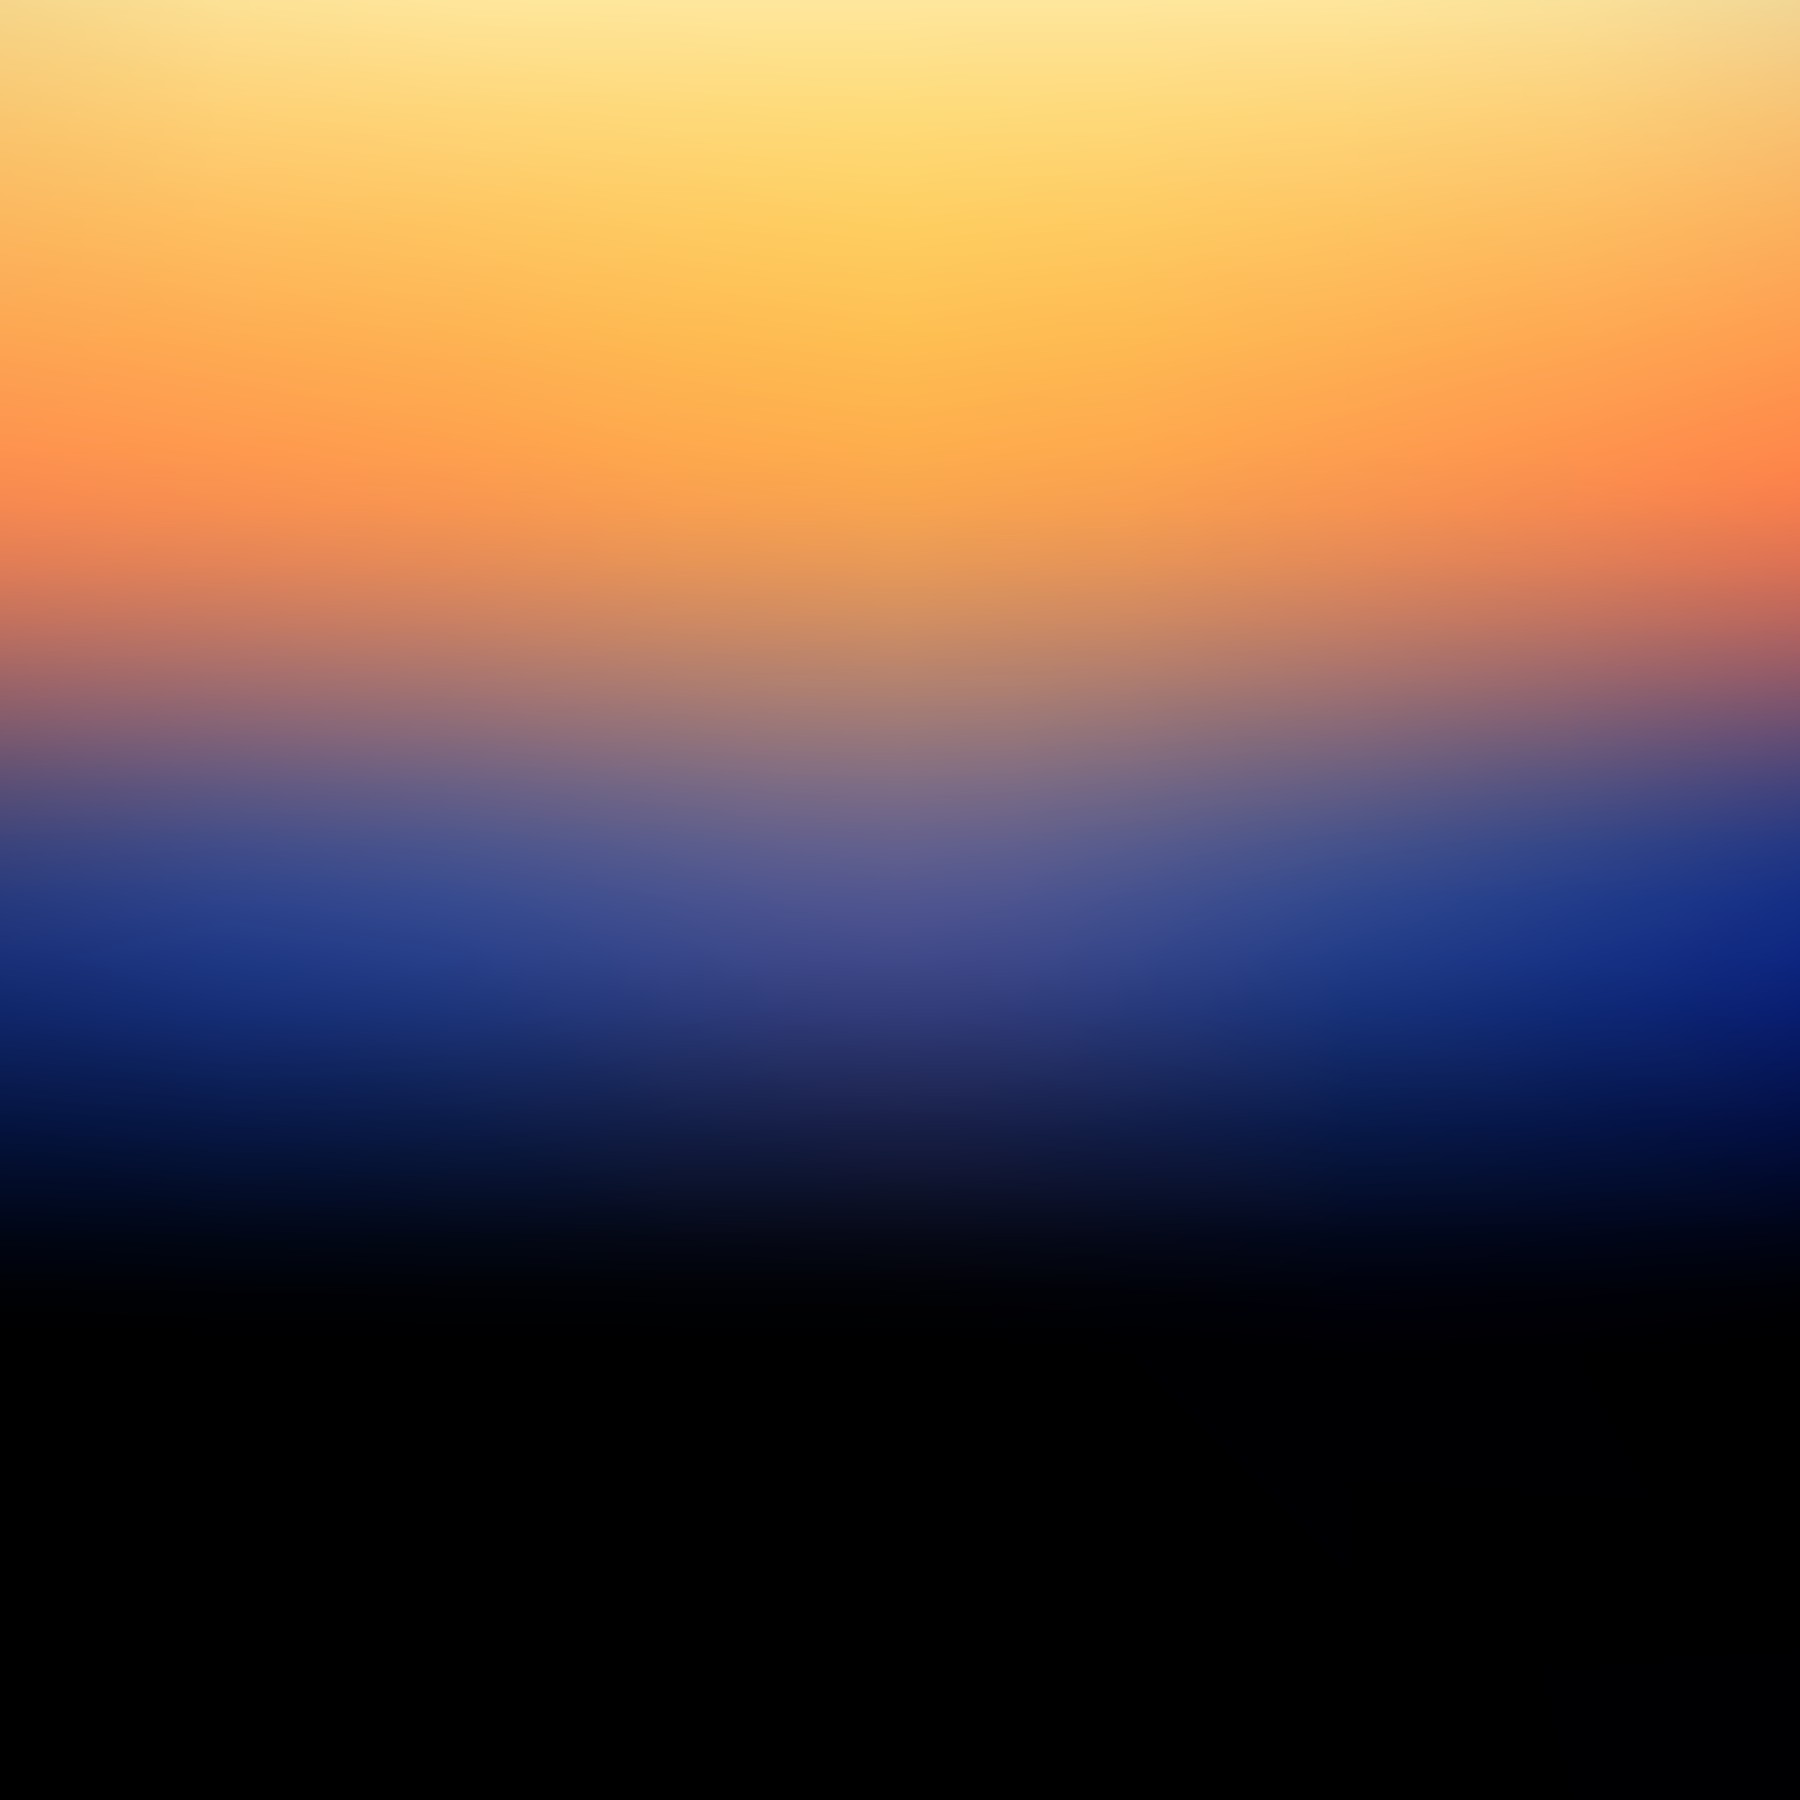 sunset-6.png